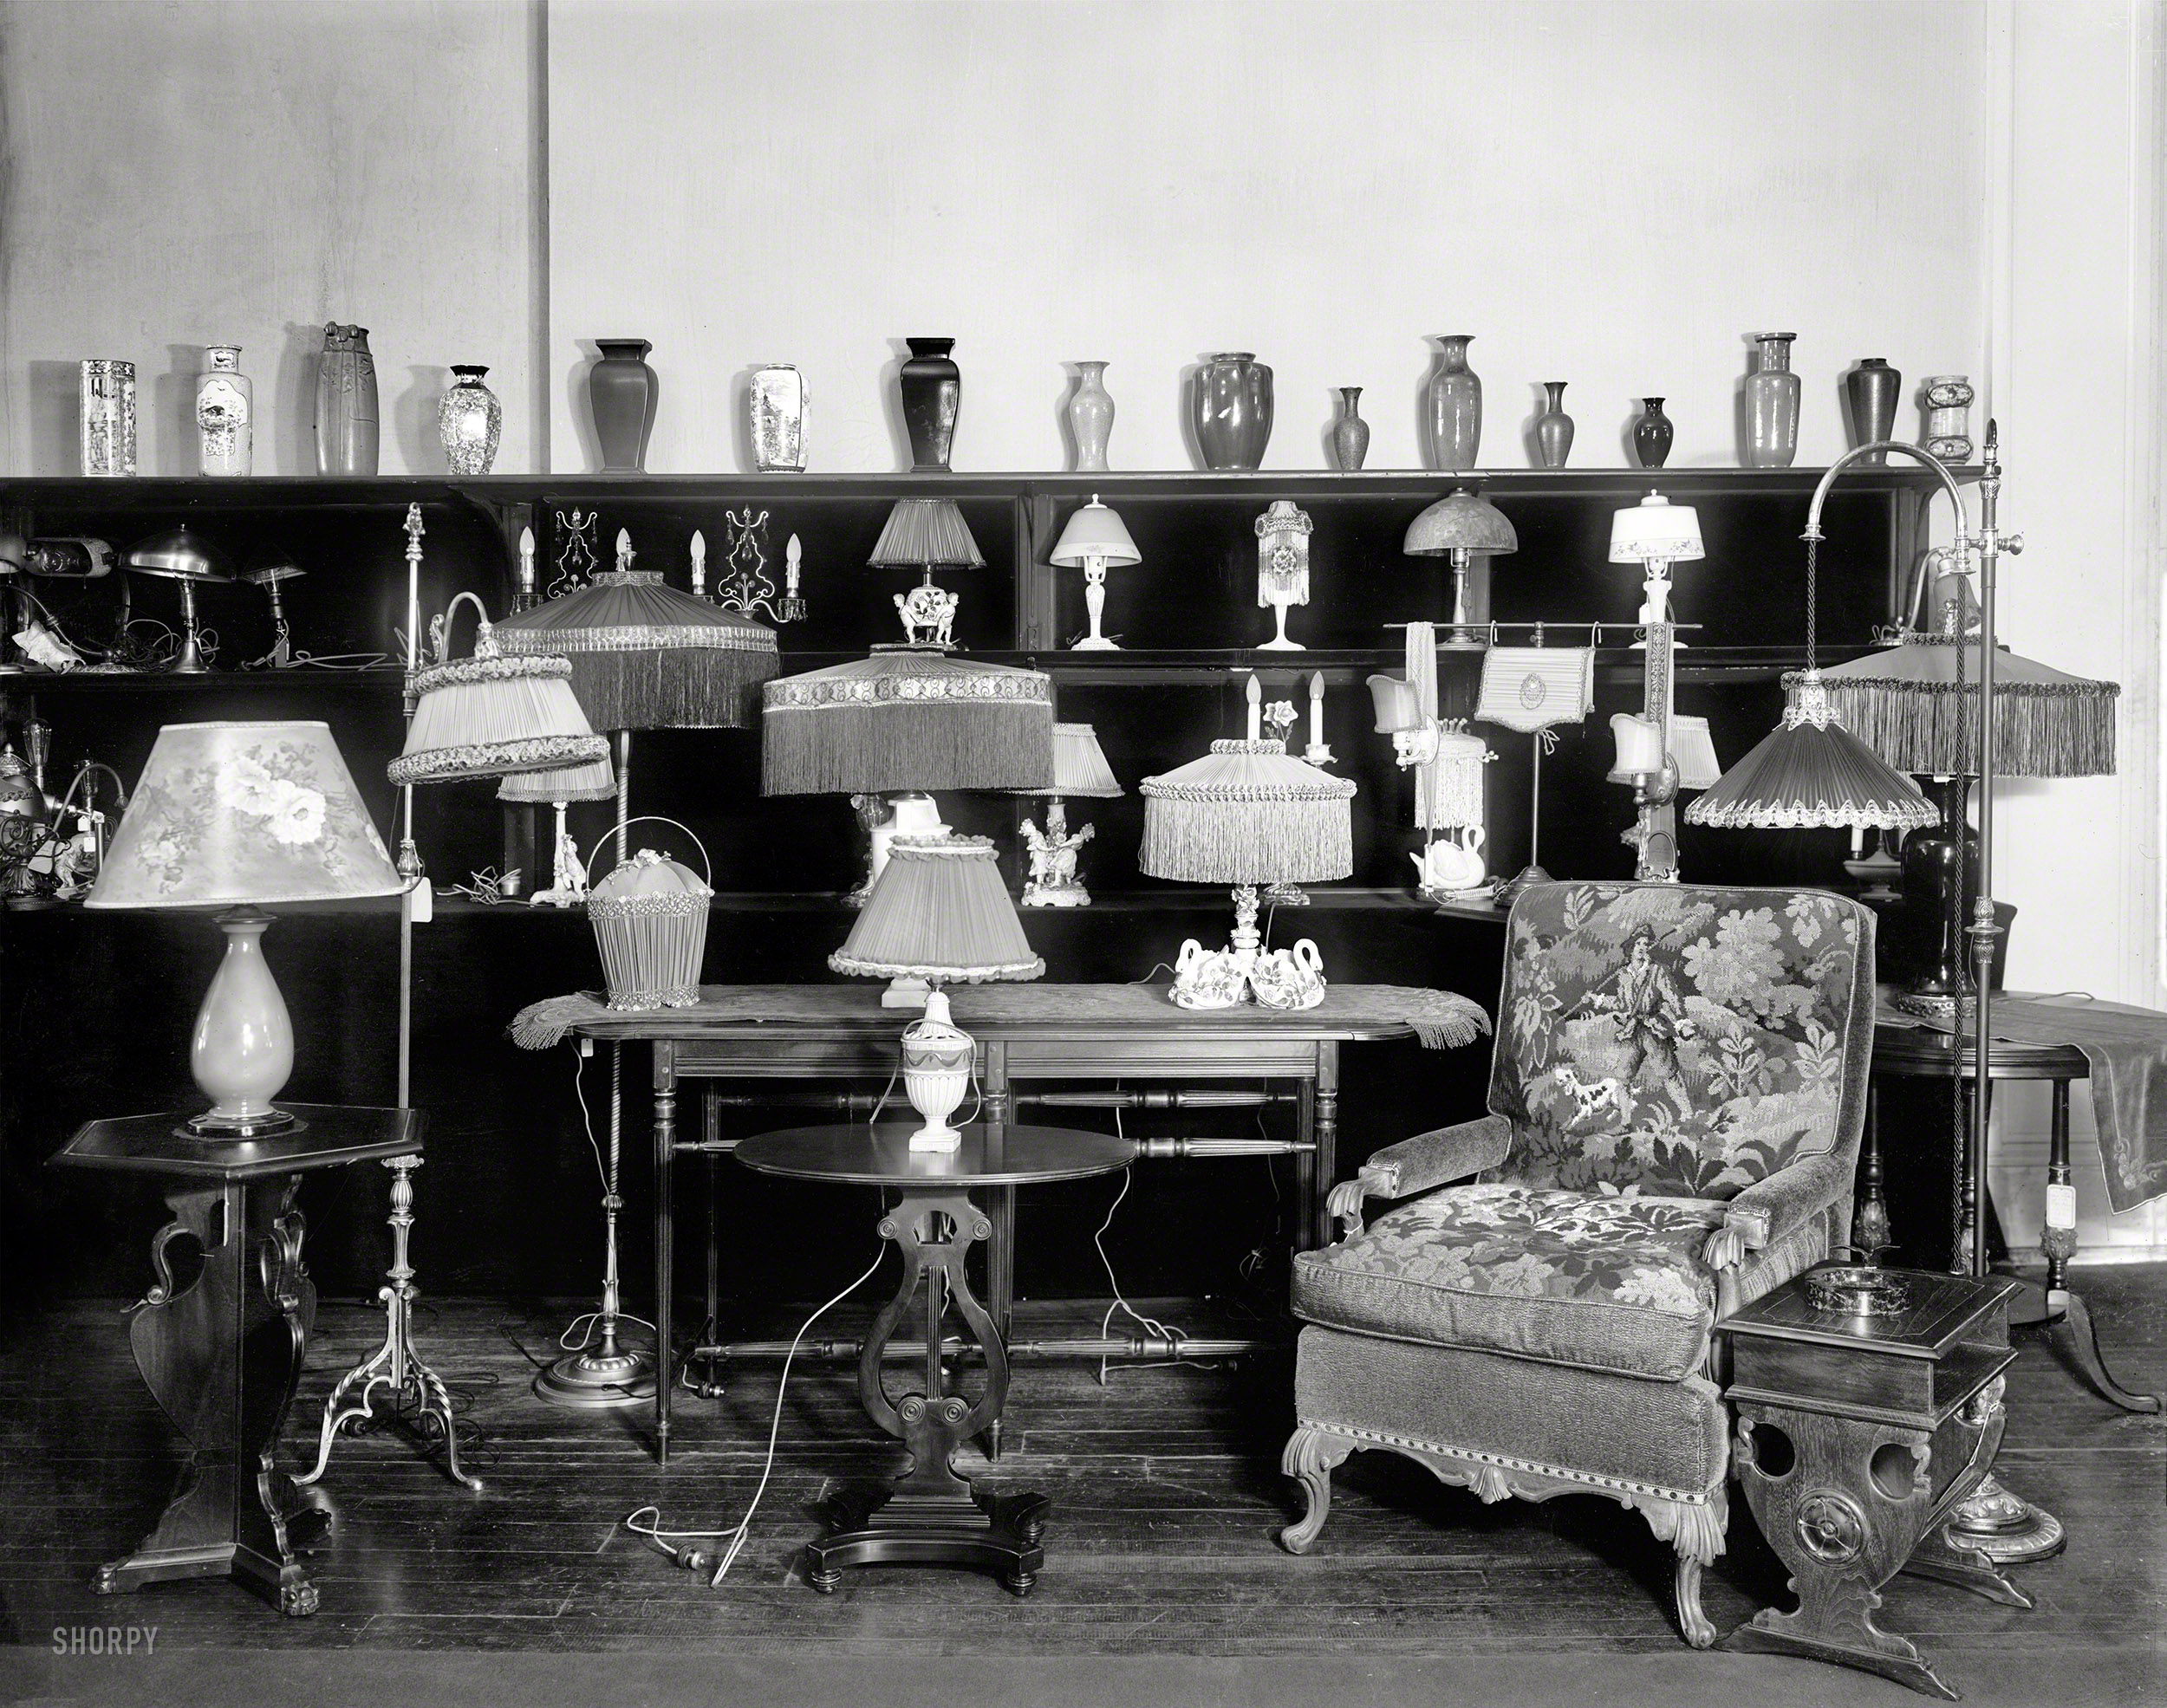 Washington, D.C., circa 1917. "Dulin & Martin Co. lamps." Back when fringed shades were the thing. Harris & Ewing Collection glass negative. View full size.